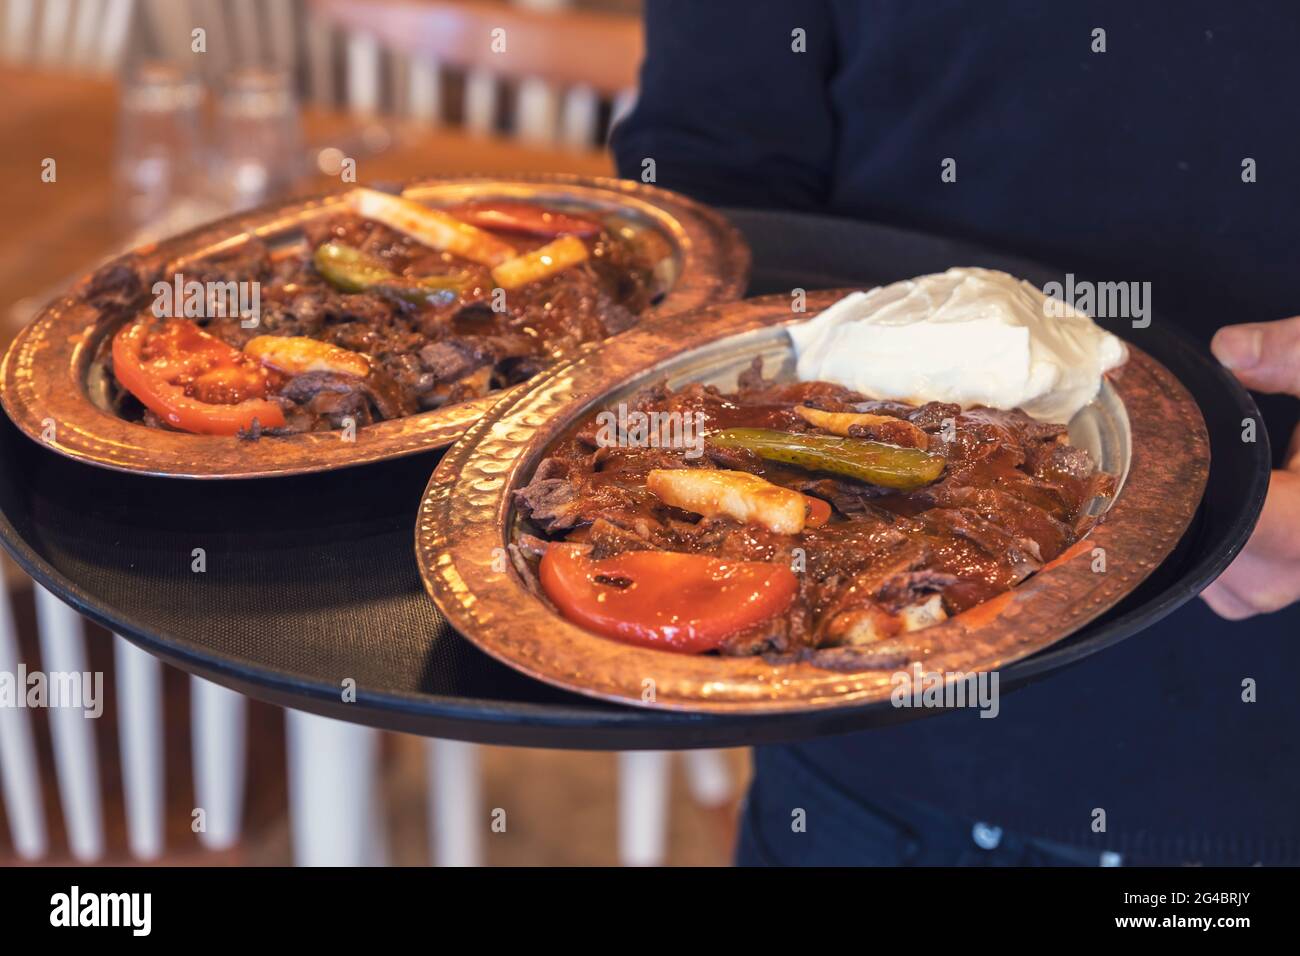 Waiter holding Iskender Kebab plates with food serving guests in a restaurant. Stock Photo